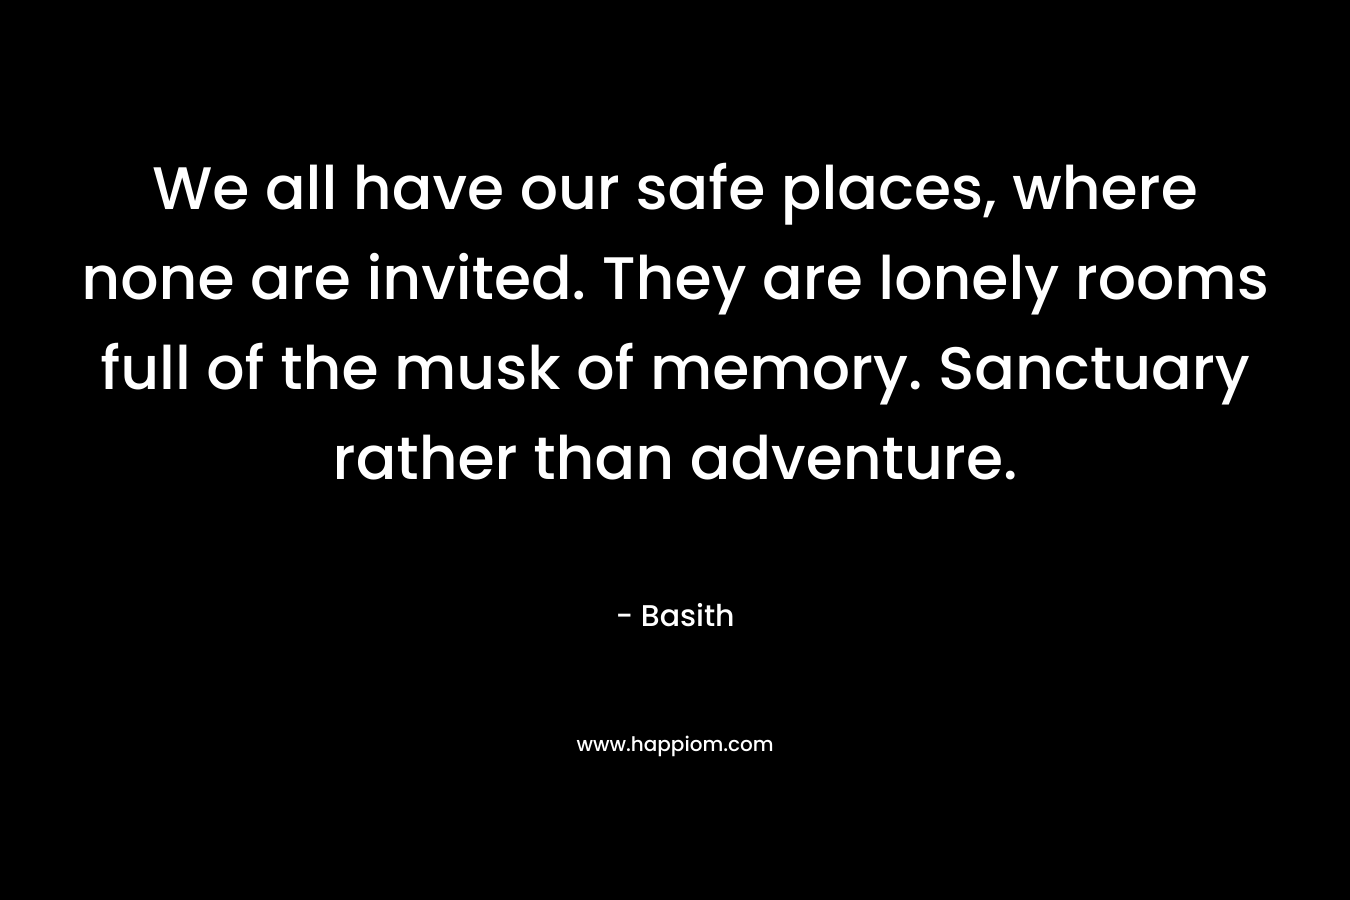 We all have our safe places, where none are invited. They are lonely rooms full of the musk of memory. Sanctuary rather than adventure.